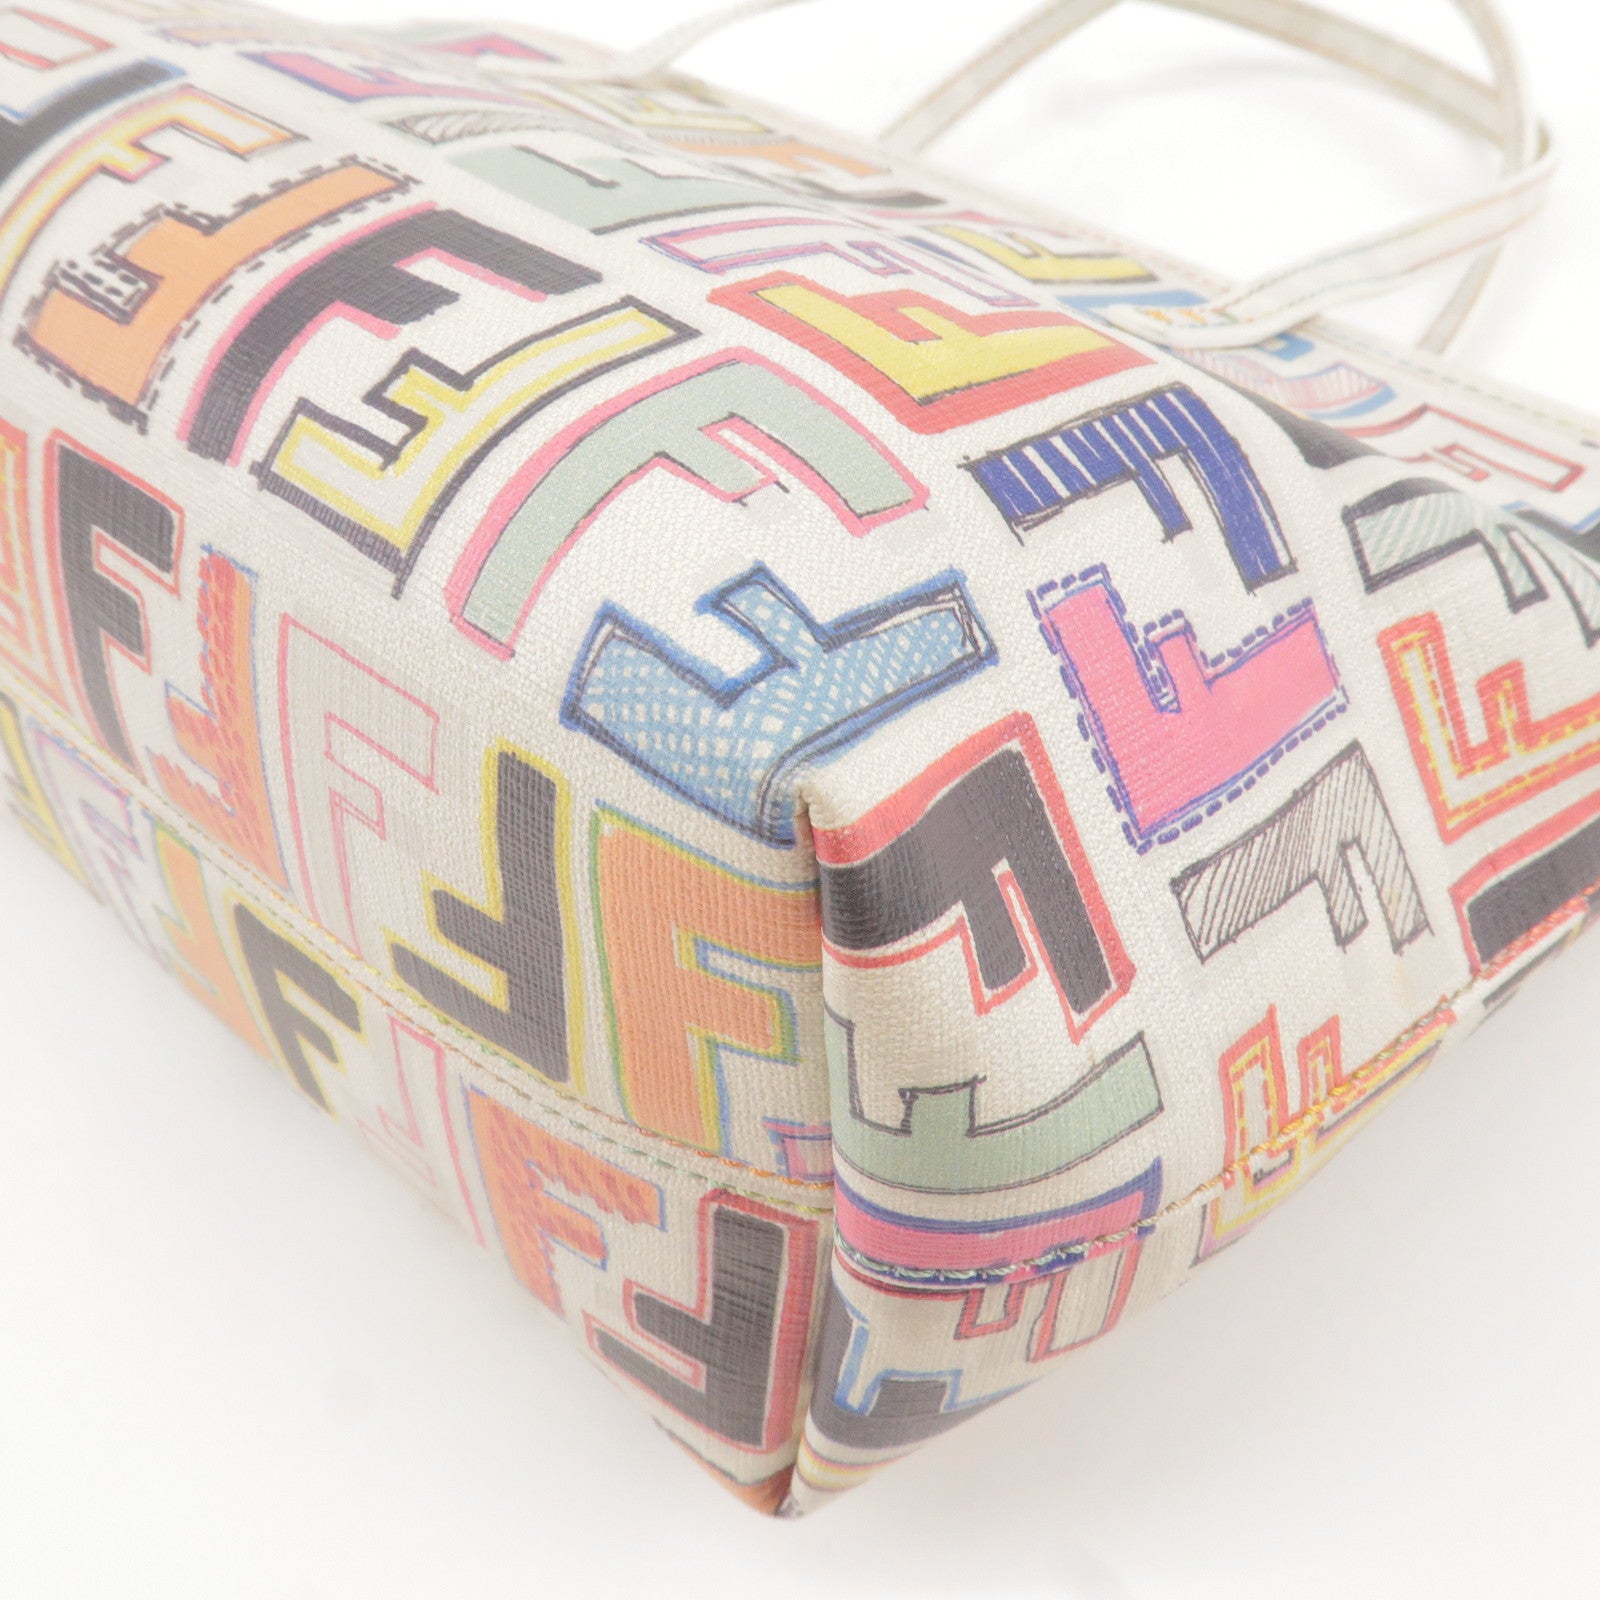 FENDI-Zucca-Logo-Print-PVC-Leather-Tote-Bag-Multi-Color-8BH185 –  dct-ep_vintage luxury Store